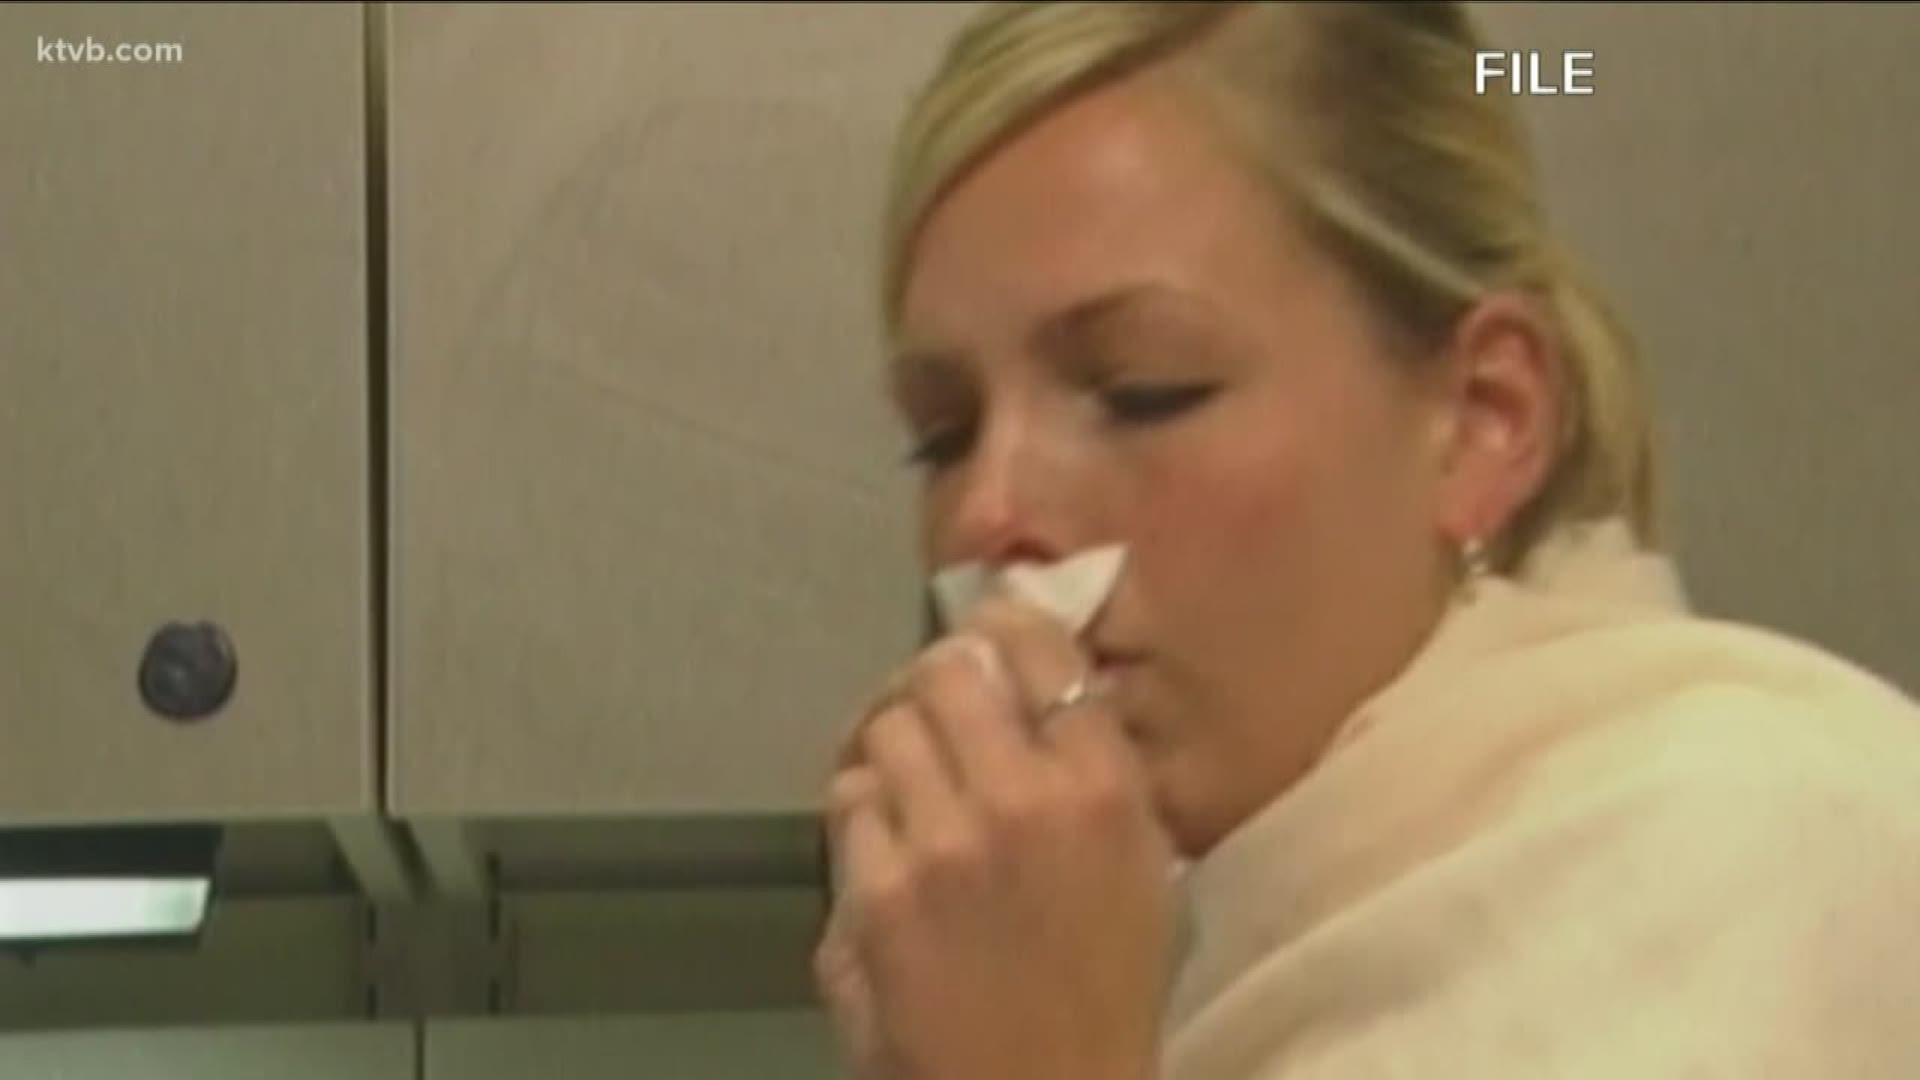 The COVID-19 outbreak brings an added a measure of worry to this season's coughs and sneezes.